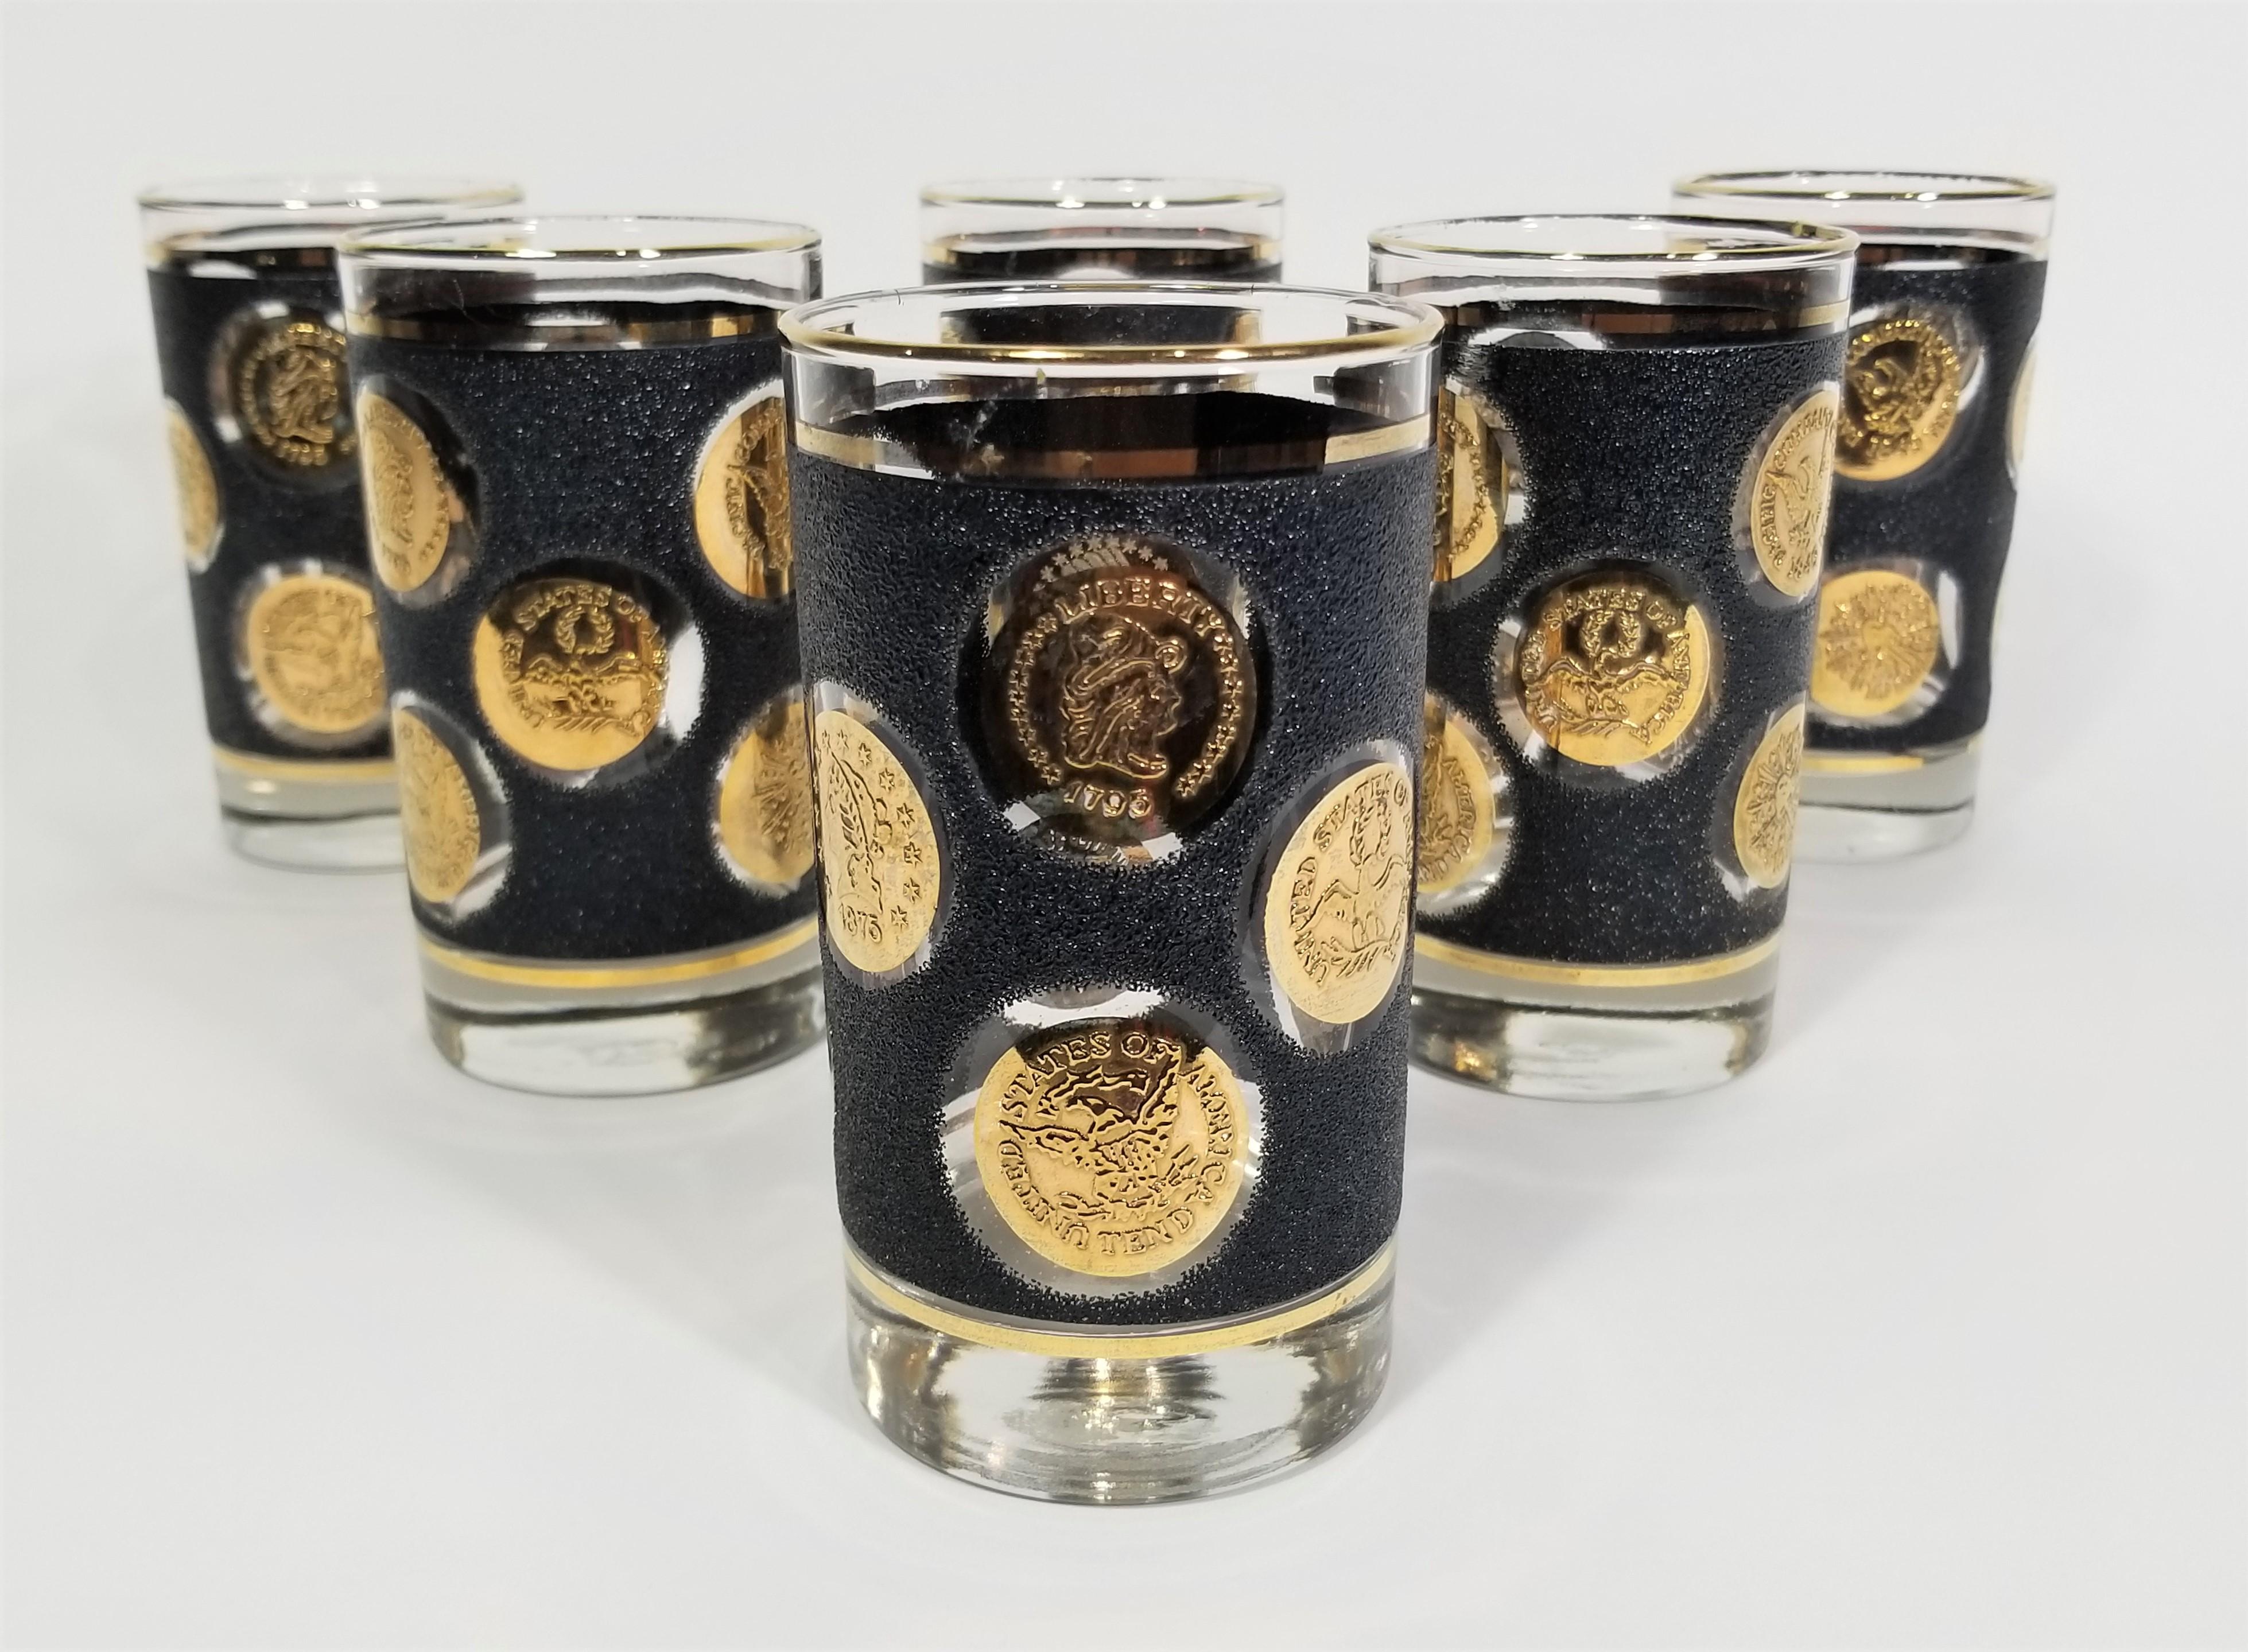 Mid century 1960s Libbey 22K gold with black. Glassware barware. Set of 6. All glasses have Libbey marking on bottom.